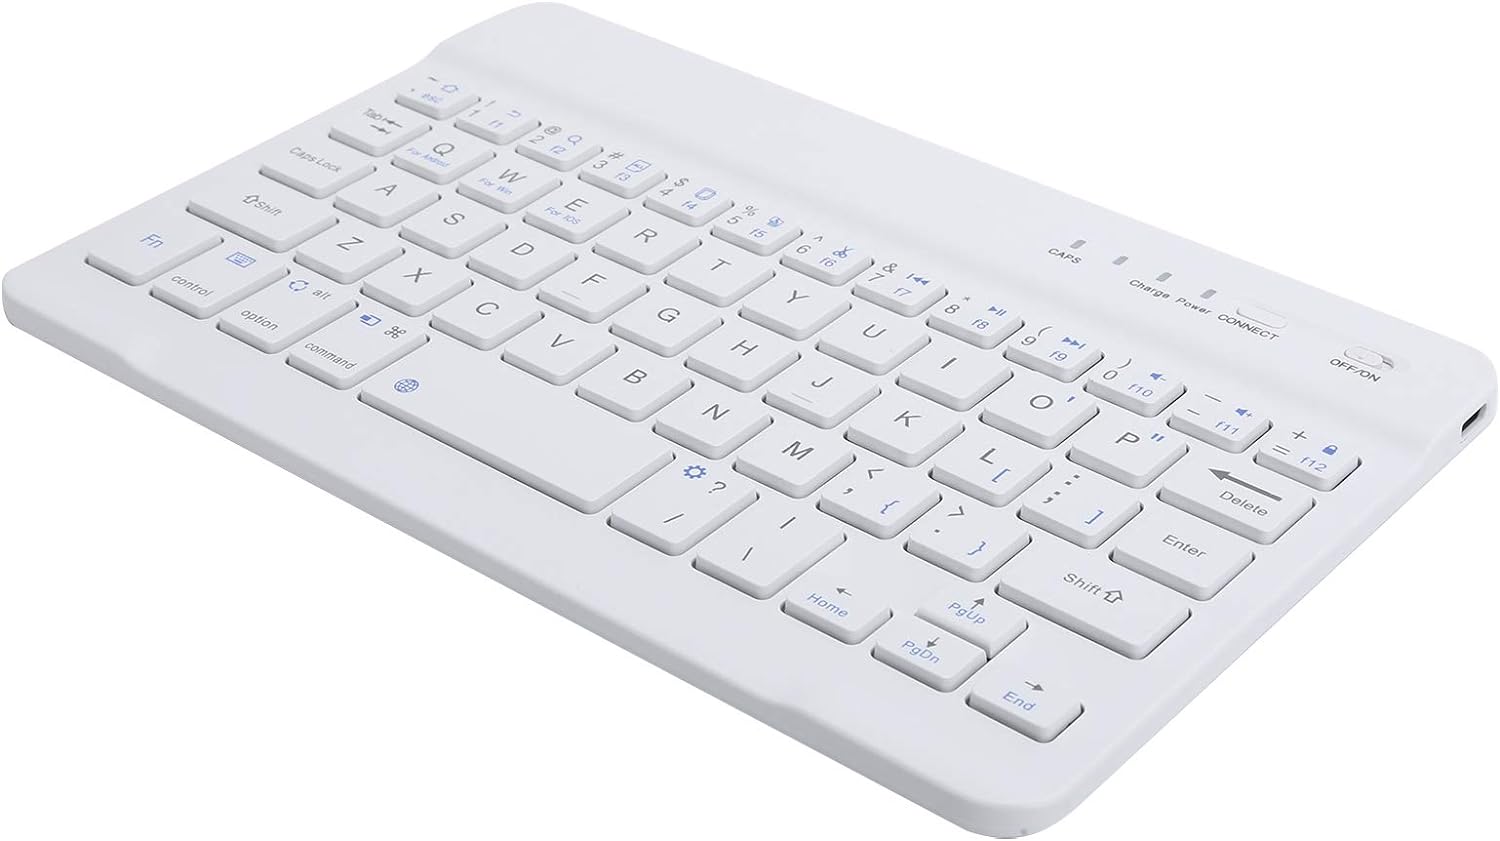  Wireless Keyboard ,  Compact Portable  Rechargeable   Ultra Slim   - NWS79 2053-6